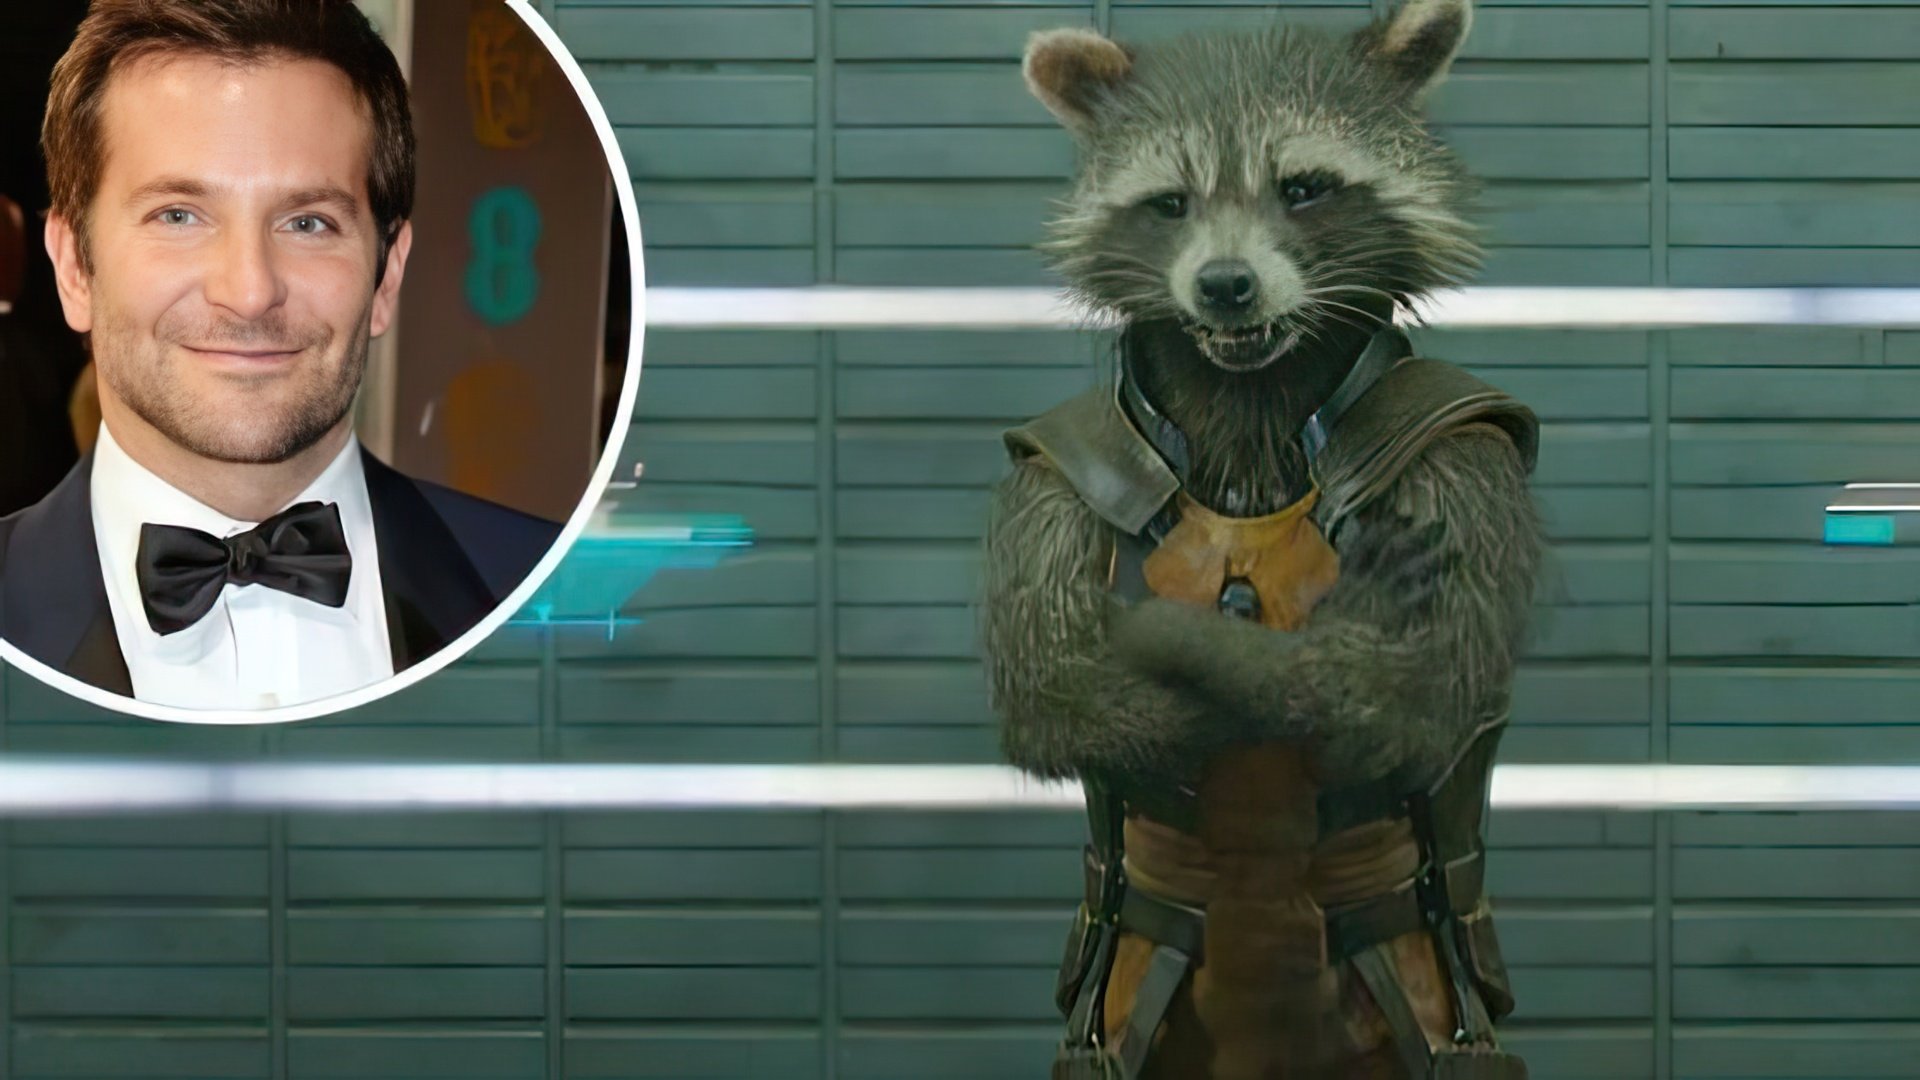 Bradley Cooper lent his voice to the raccoon from 'Guardians of the Galaxy'